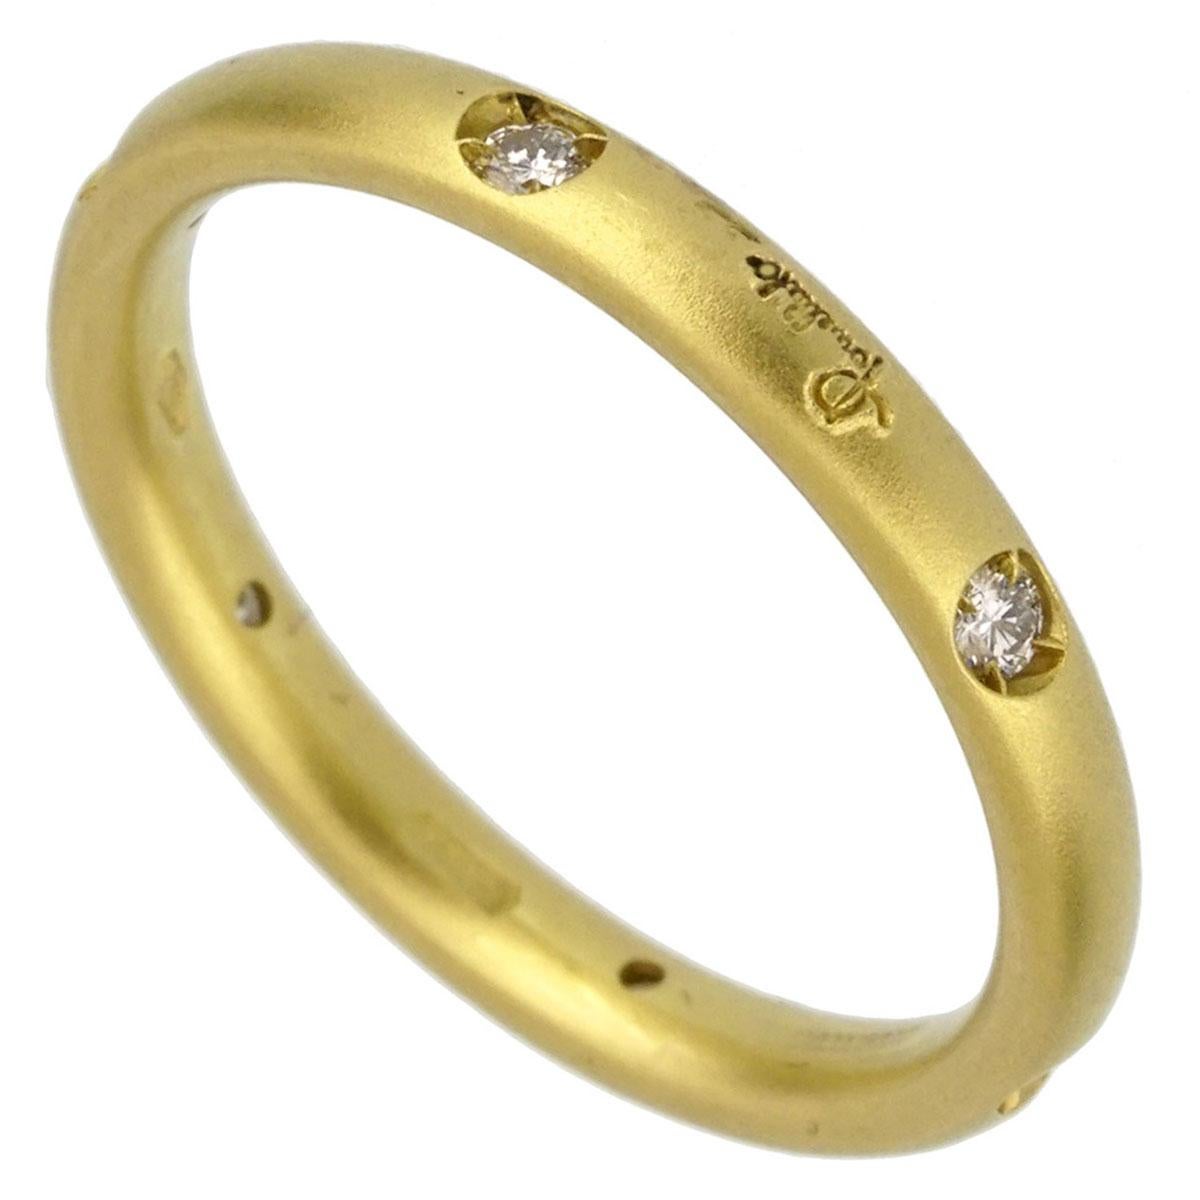 A chic brand new Pomellato diamond ring adorned with round brilliant cut diamonds in 18k yellow gold. The ring measures a size 4 1/4

Sku: 2359